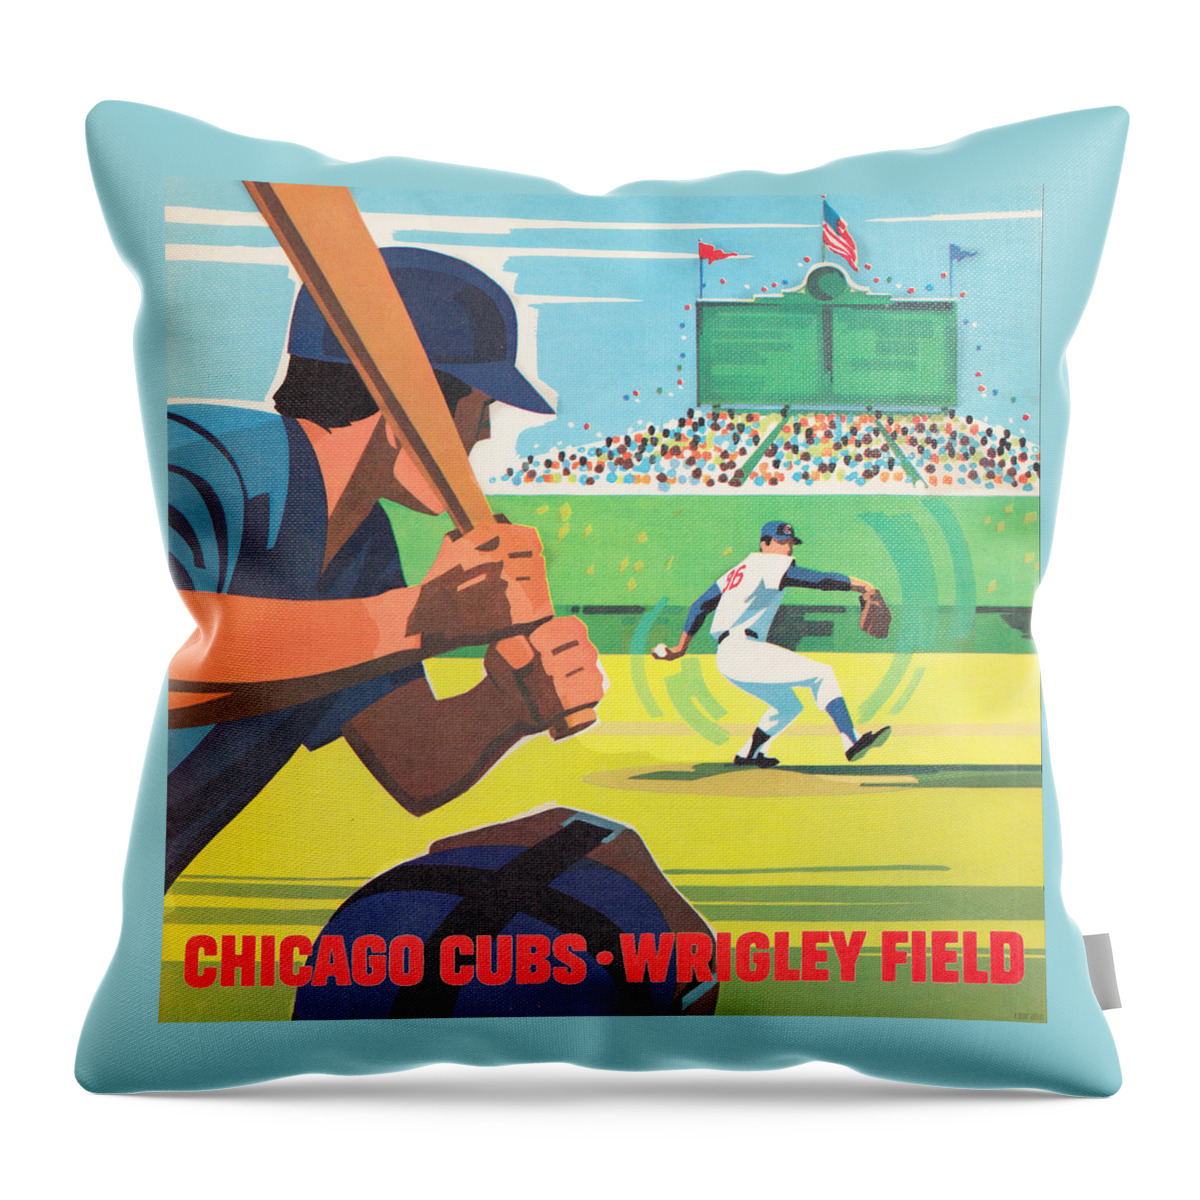 Chicago Throw Pillow featuring the mixed media 1971 Chicago Cubs Baseball Art by Row One Brand